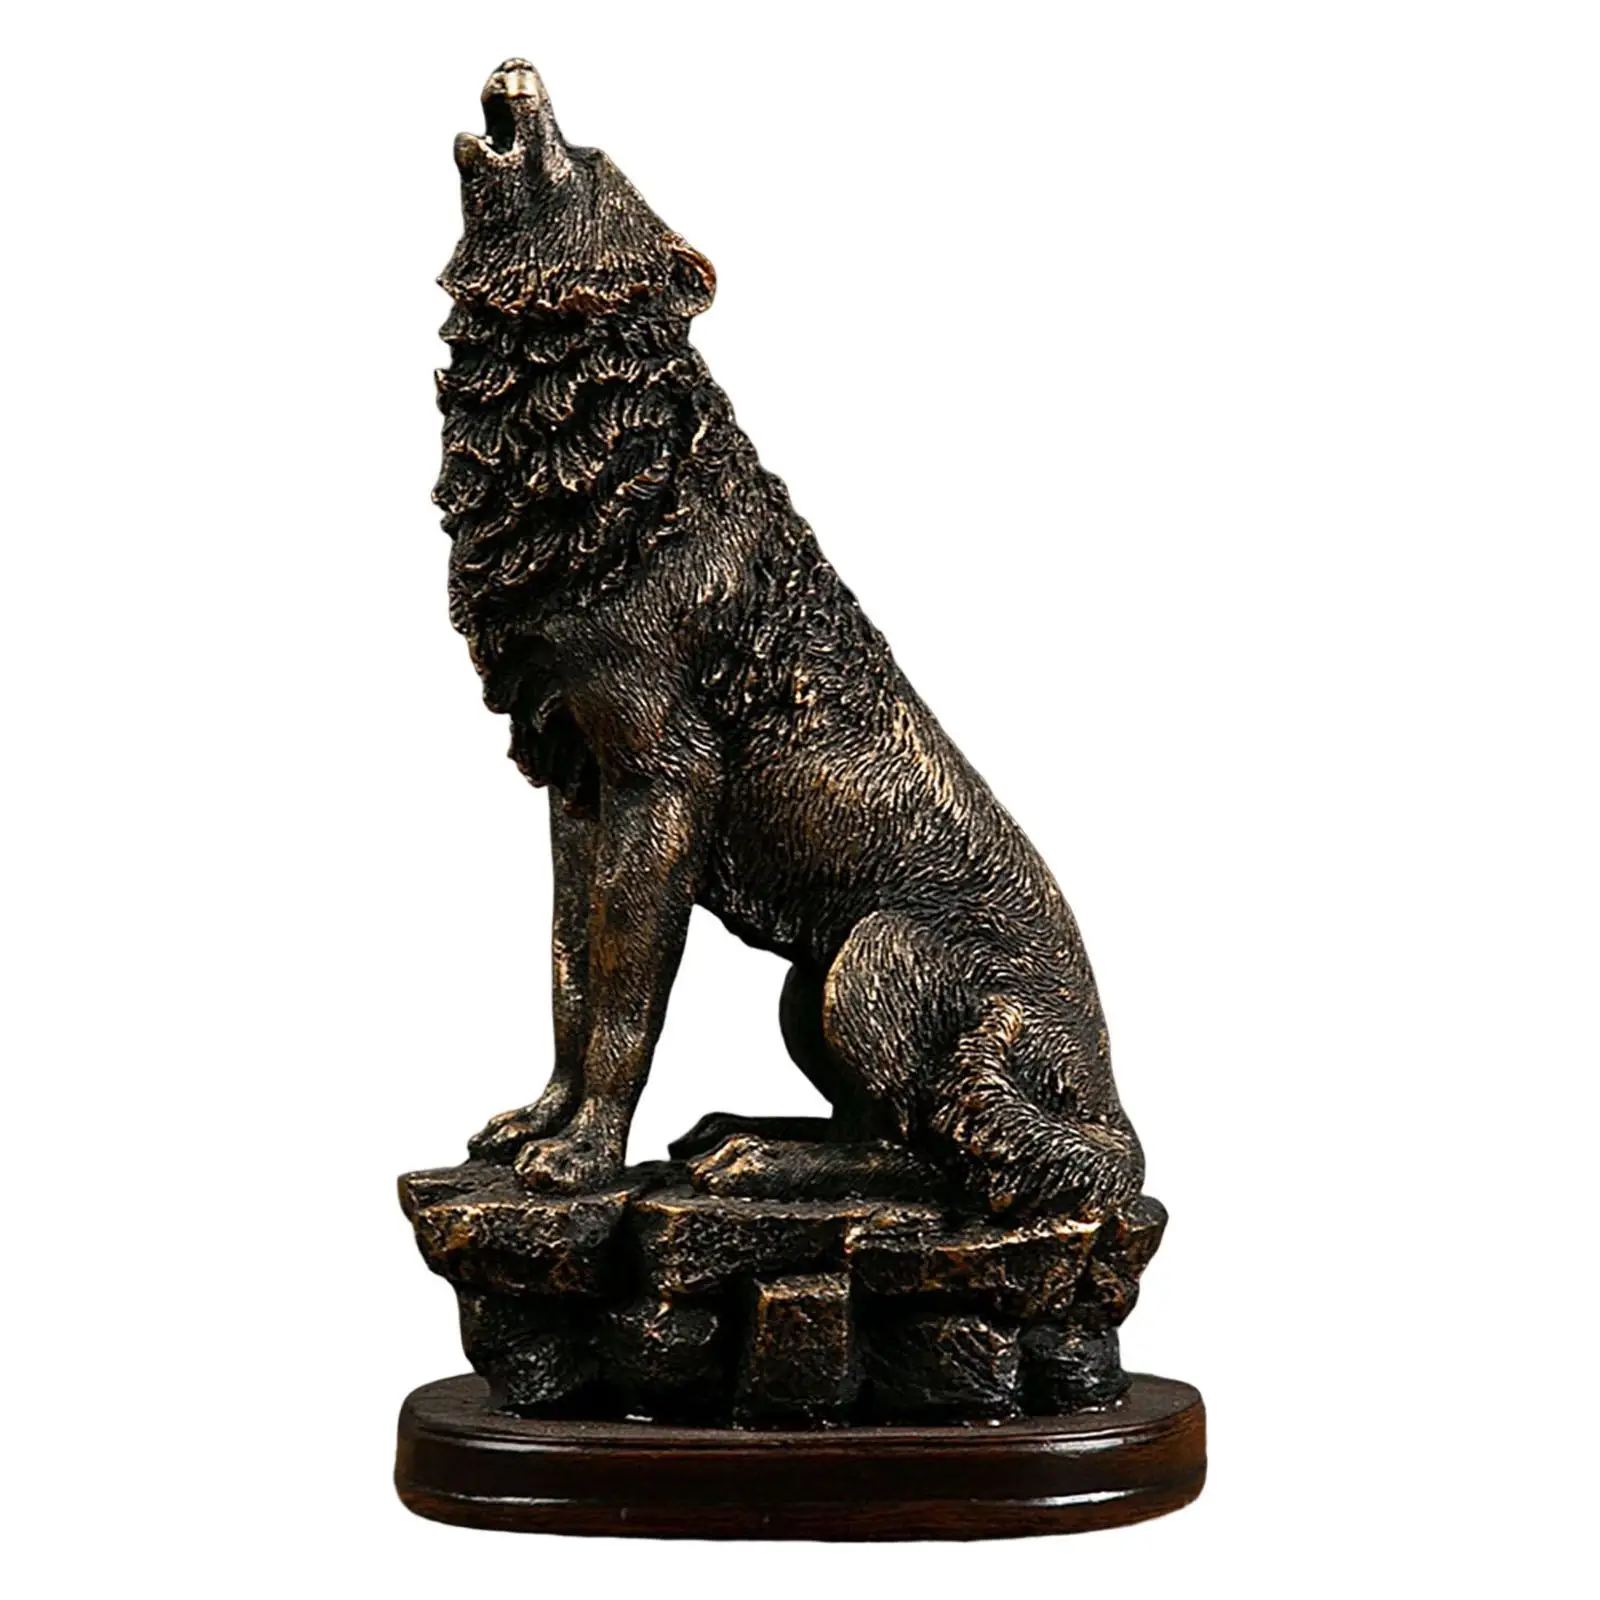 Wolf Figurine, Tabletop Ornament Creative Resin Sculpture Animal Statue for Dining Room Office Gift Fireplace